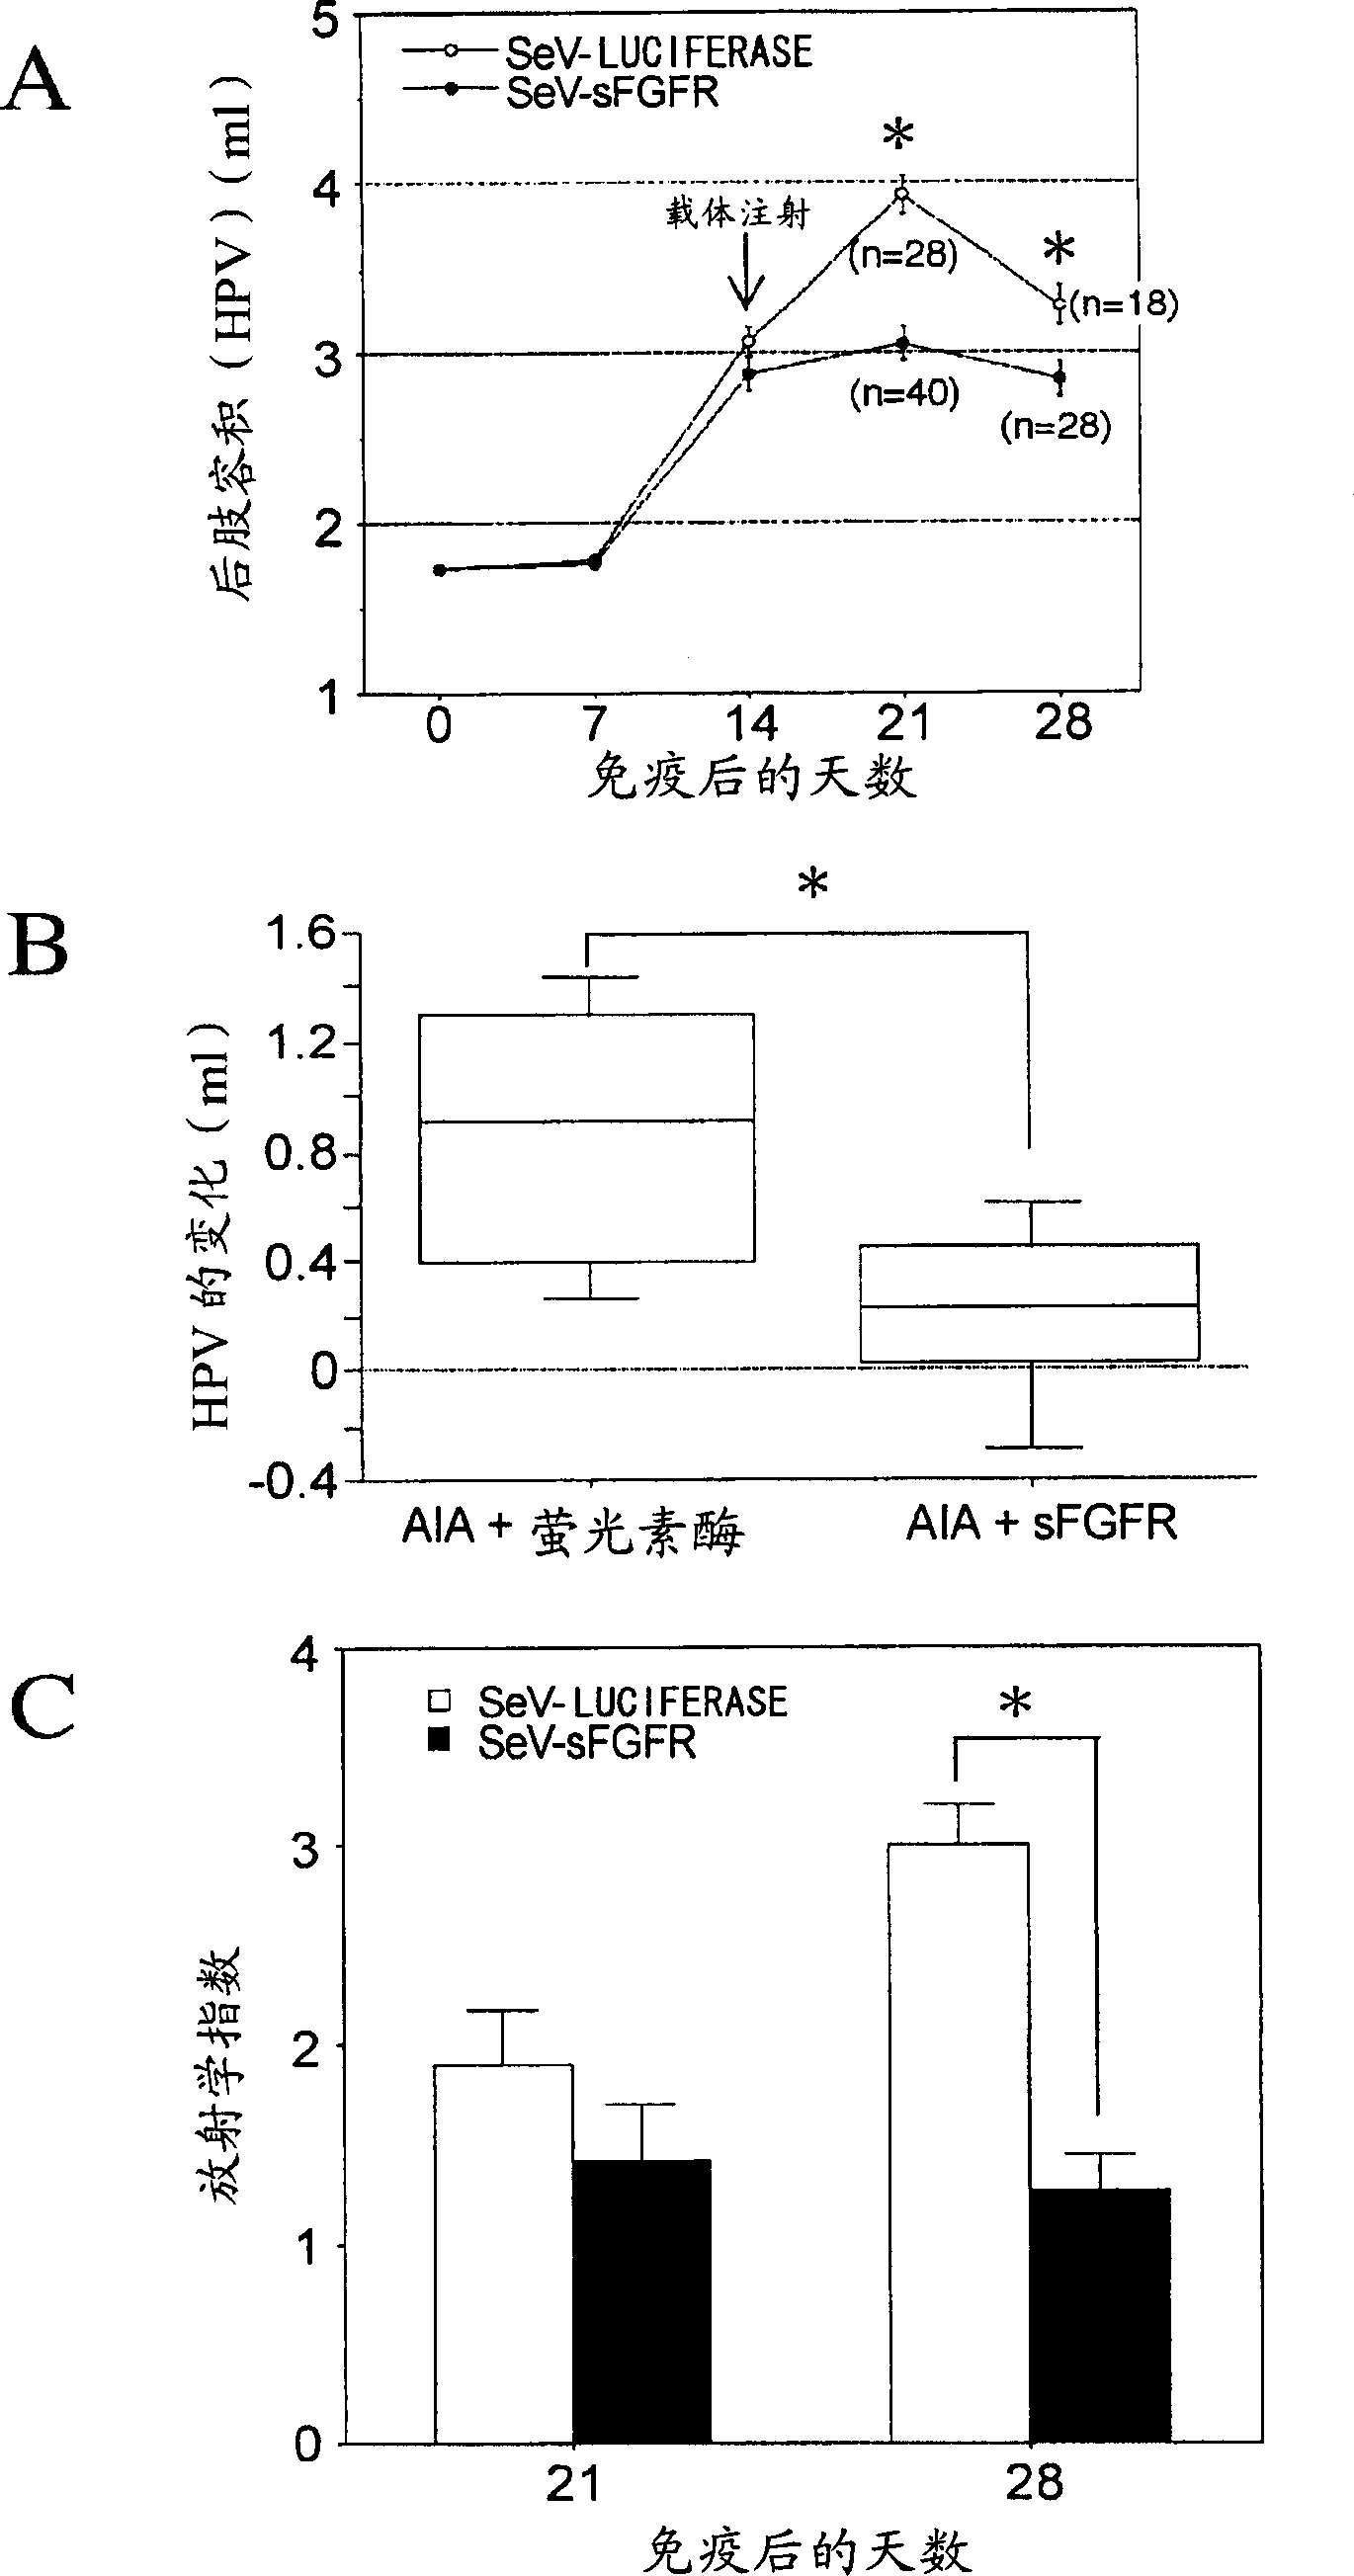 Method of treating inflammtory disease associated with bone destruction